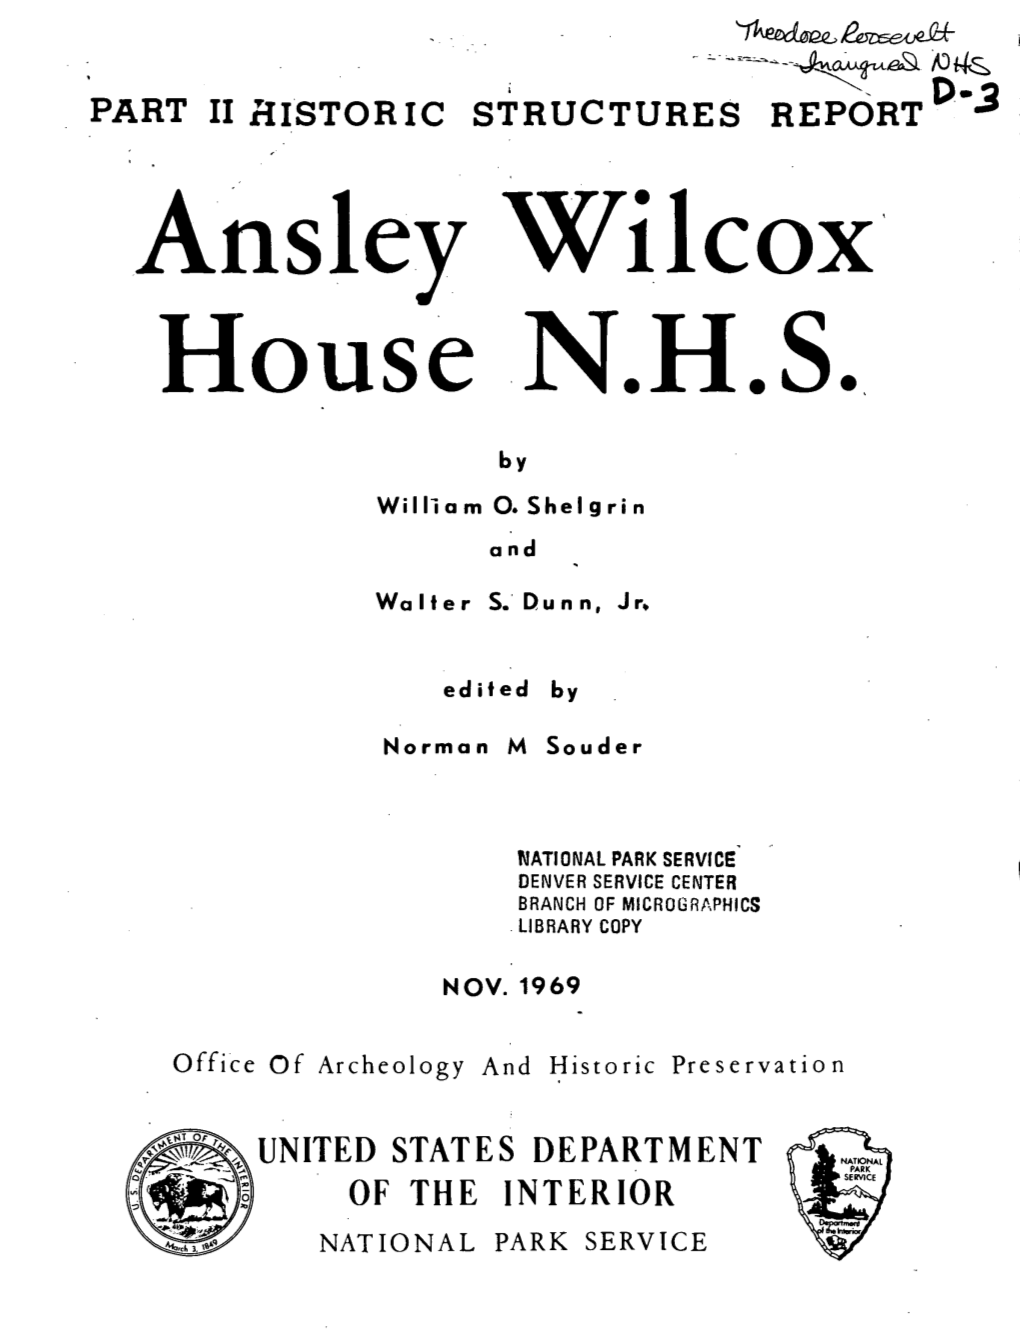 Ansley Wilcox House N.H.S., Part II